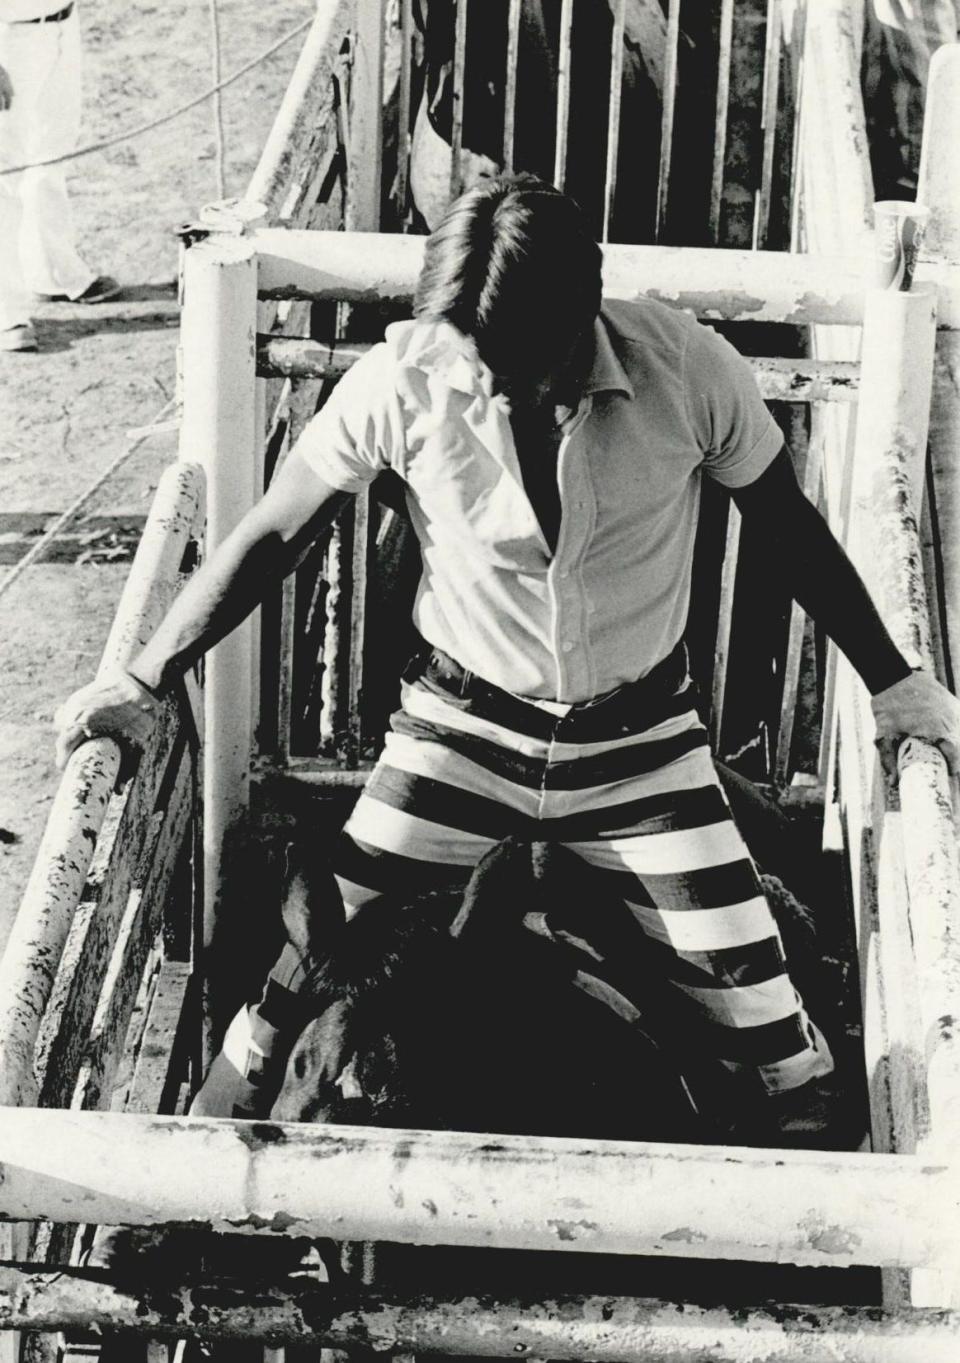 The Oklahoma Department of Corrections is trying to revive the prison rodeo at the Oklahoma State Penitentiary in McAlester. This photo from the rodeo in 1984 shows an inmate preparing to compete.